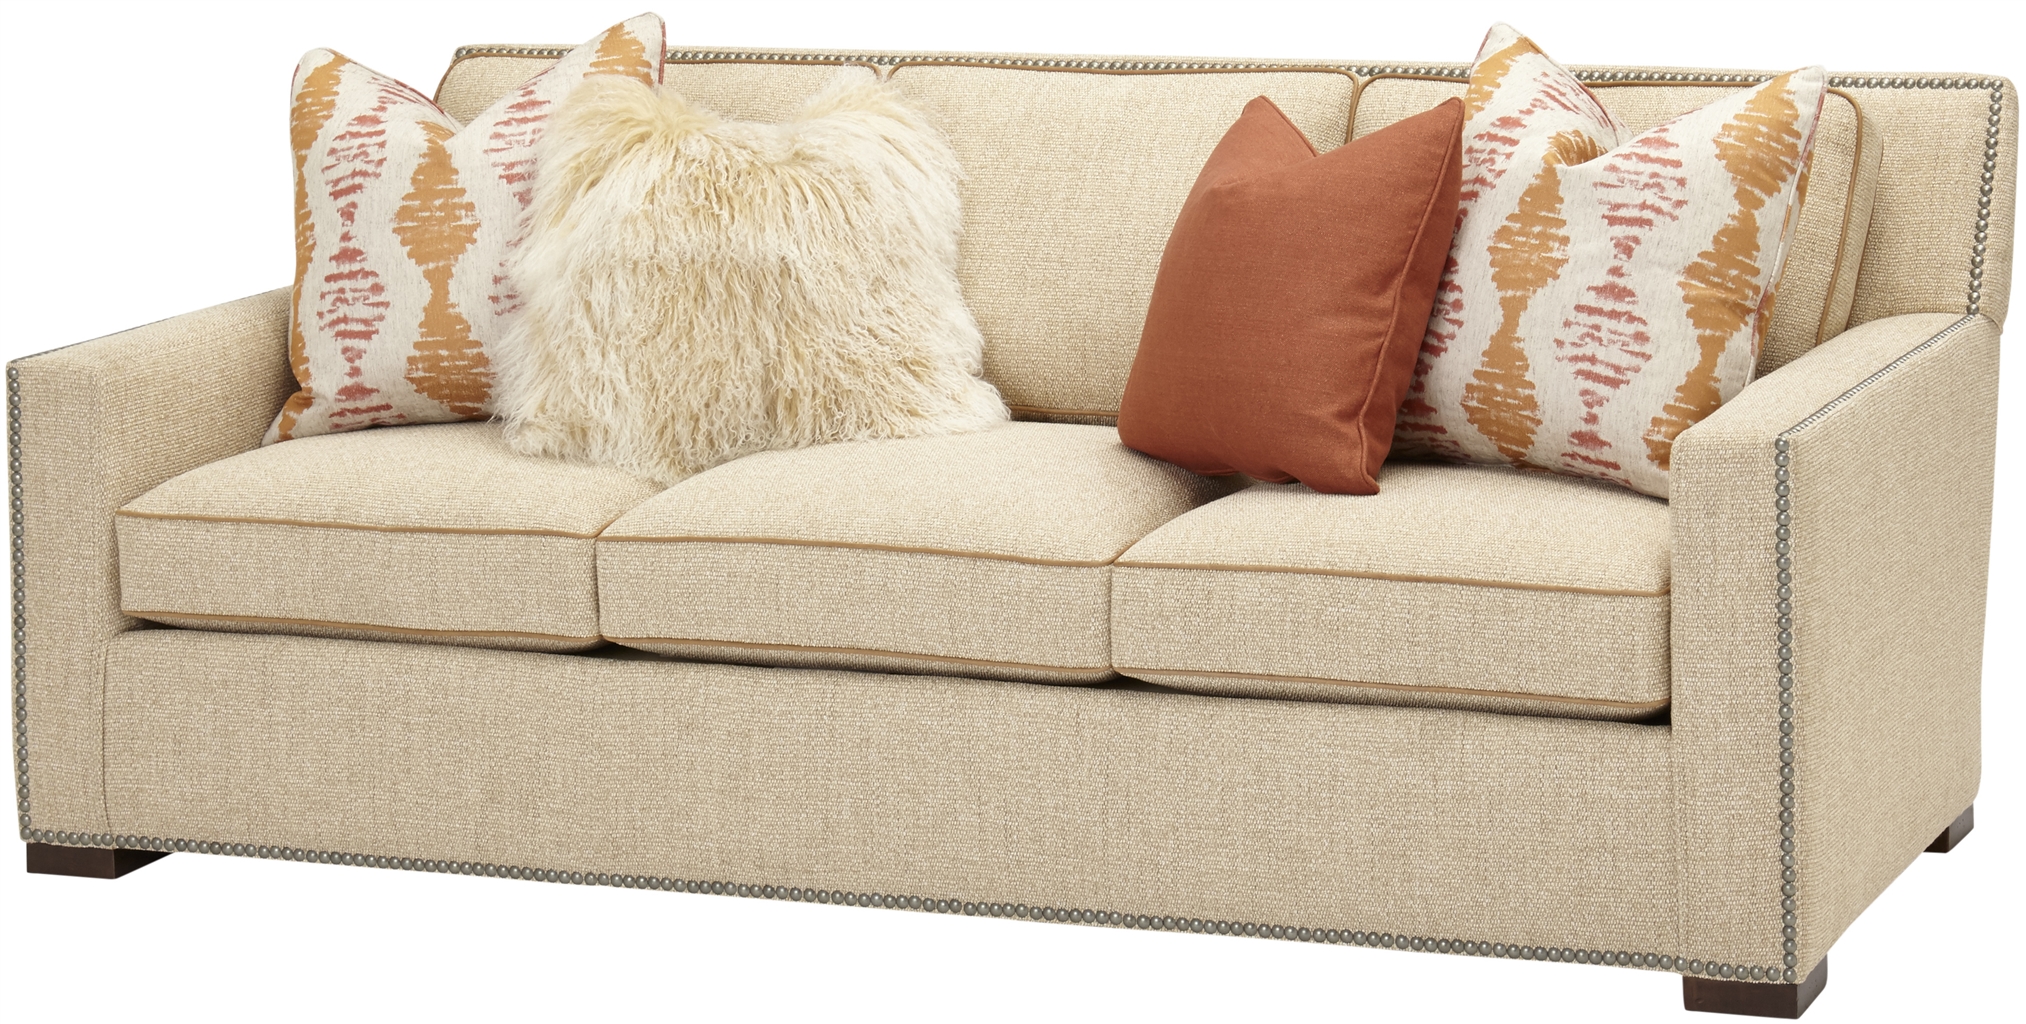 SOFA, COUCH & LOVESEAT Soft-hued Upholstered Sofa